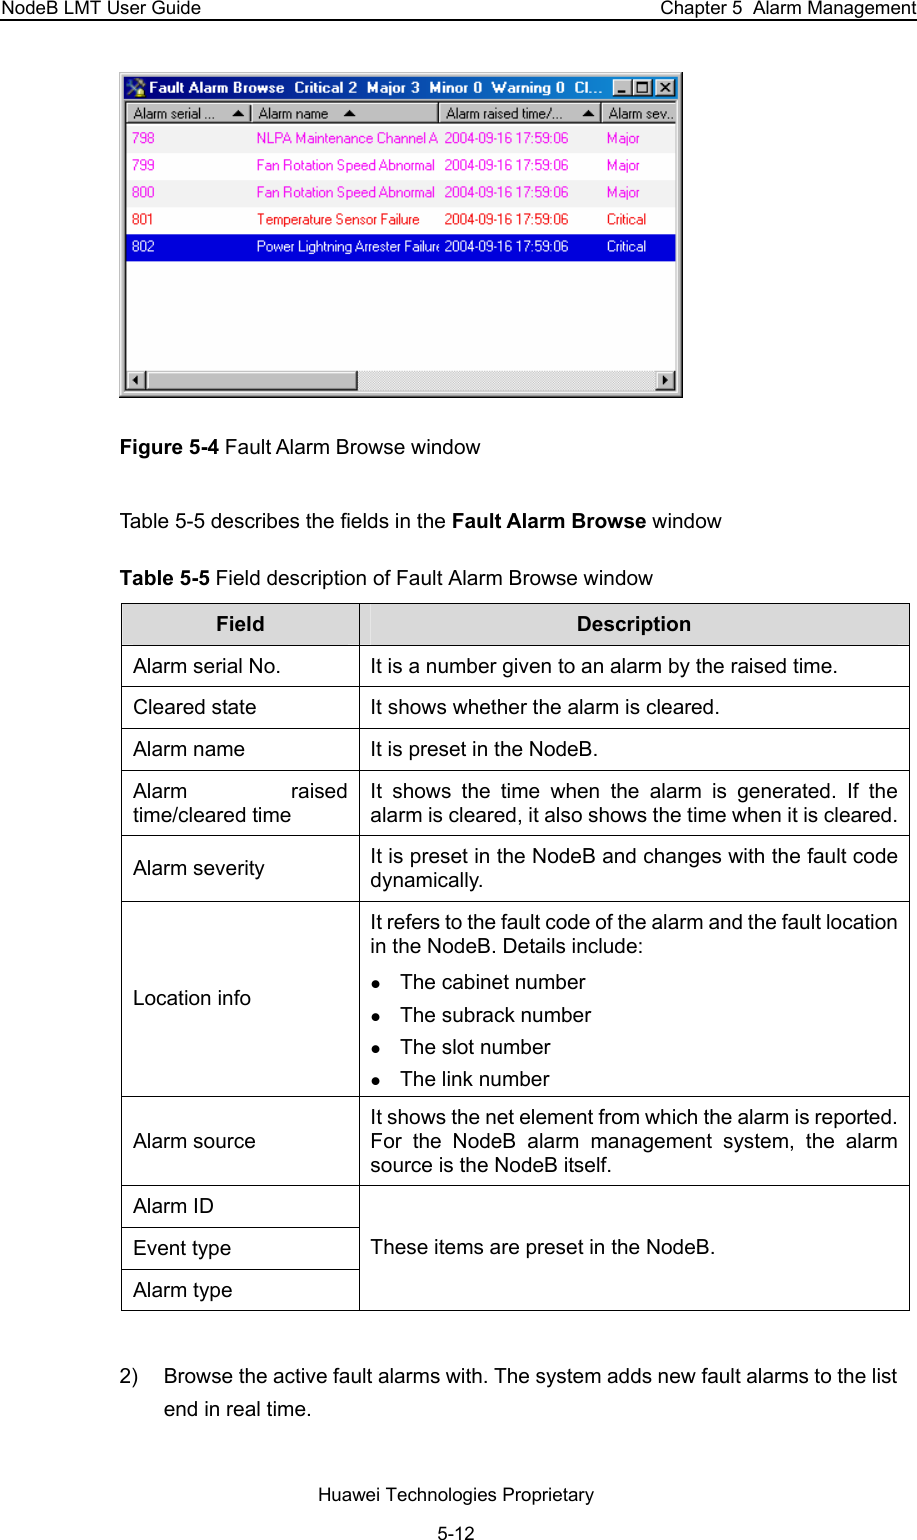 NodeB LMT User Guide  Chapter 5  Alarm Management  Figure 5-4 Fault Alarm Browse window Table 5-5 describes the fields in the Fault Alarm Browse window  Table 5-5 Field description of Fault Alarm Browse window  Field   Description  Alarm serial No.  It is a number given to an alarm by the raised time.  Cleared state  It shows whether the alarm is cleared.  Alarm name  It is preset in the NodeB.  Alarm raised time/cleared time  It shows the time when the alarm is generated. If the alarm is cleared, it also shows the time when it is cleared. Alarm severity  It is preset in the NodeB and changes with the fault code dynamically.  Location info It refers to the fault code of the alarm and the fault location in the NodeB. Details include:  z The cabinet number z The subrack number  z The slot number  z The link number  Alarm source It shows the net element from which the alarm is reported. For the NodeB alarm management system, the alarm source is the NodeB itself.  Alarm ID Event type Alarm type These items are preset in the NodeB.   2)  Browse the active fault alarms with. The system adds new fault alarms to the list end in real time. Huawei Technologies Proprietary 5-12 